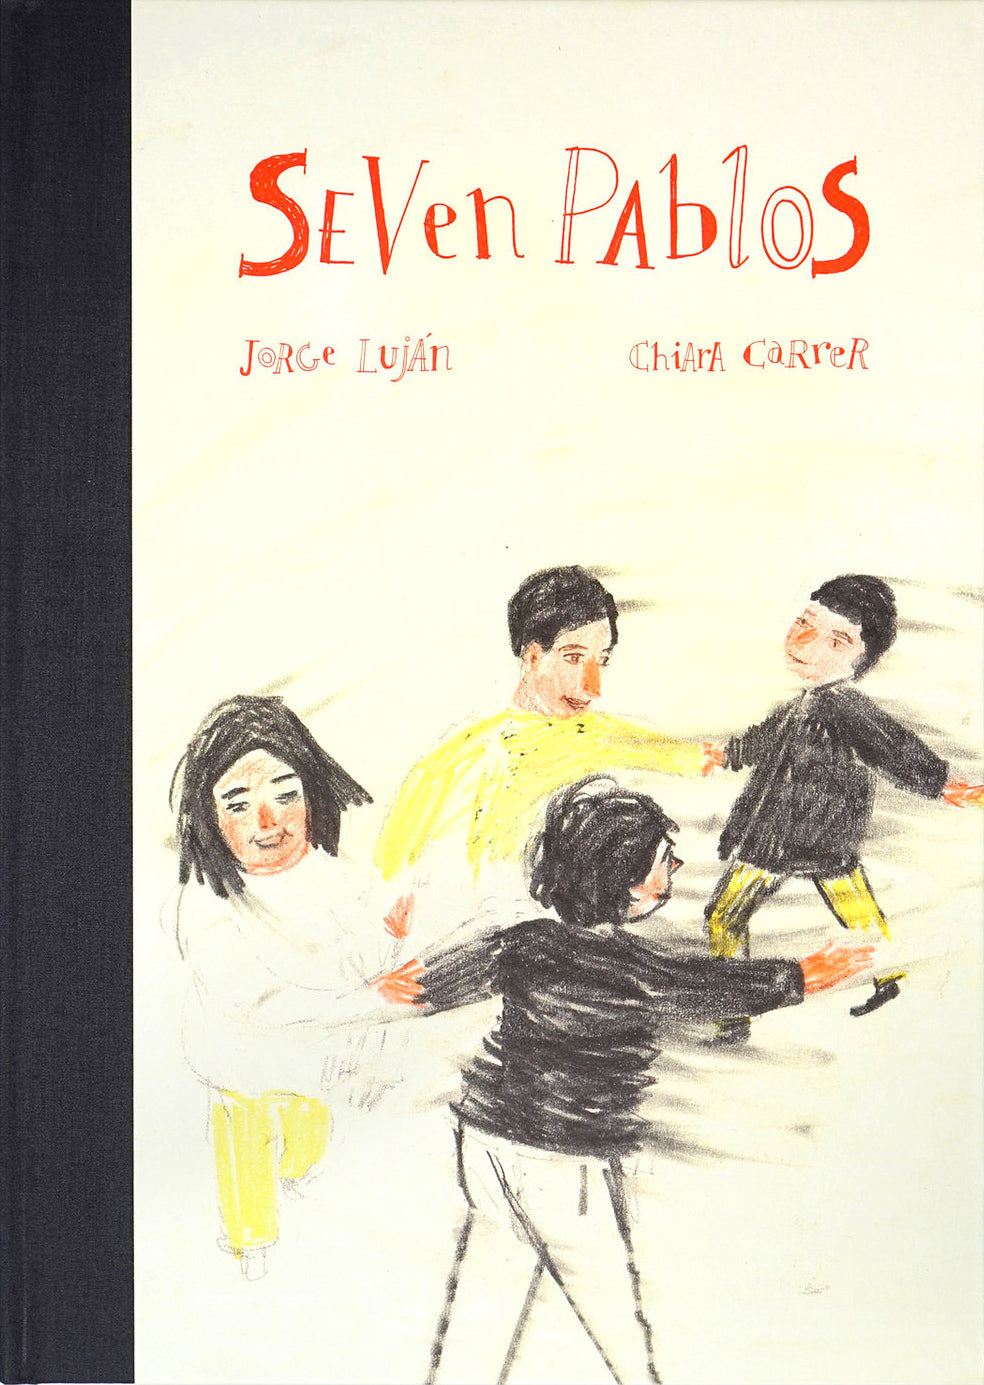 Seven Pablos by Jorge Luján and Chiara Carrer